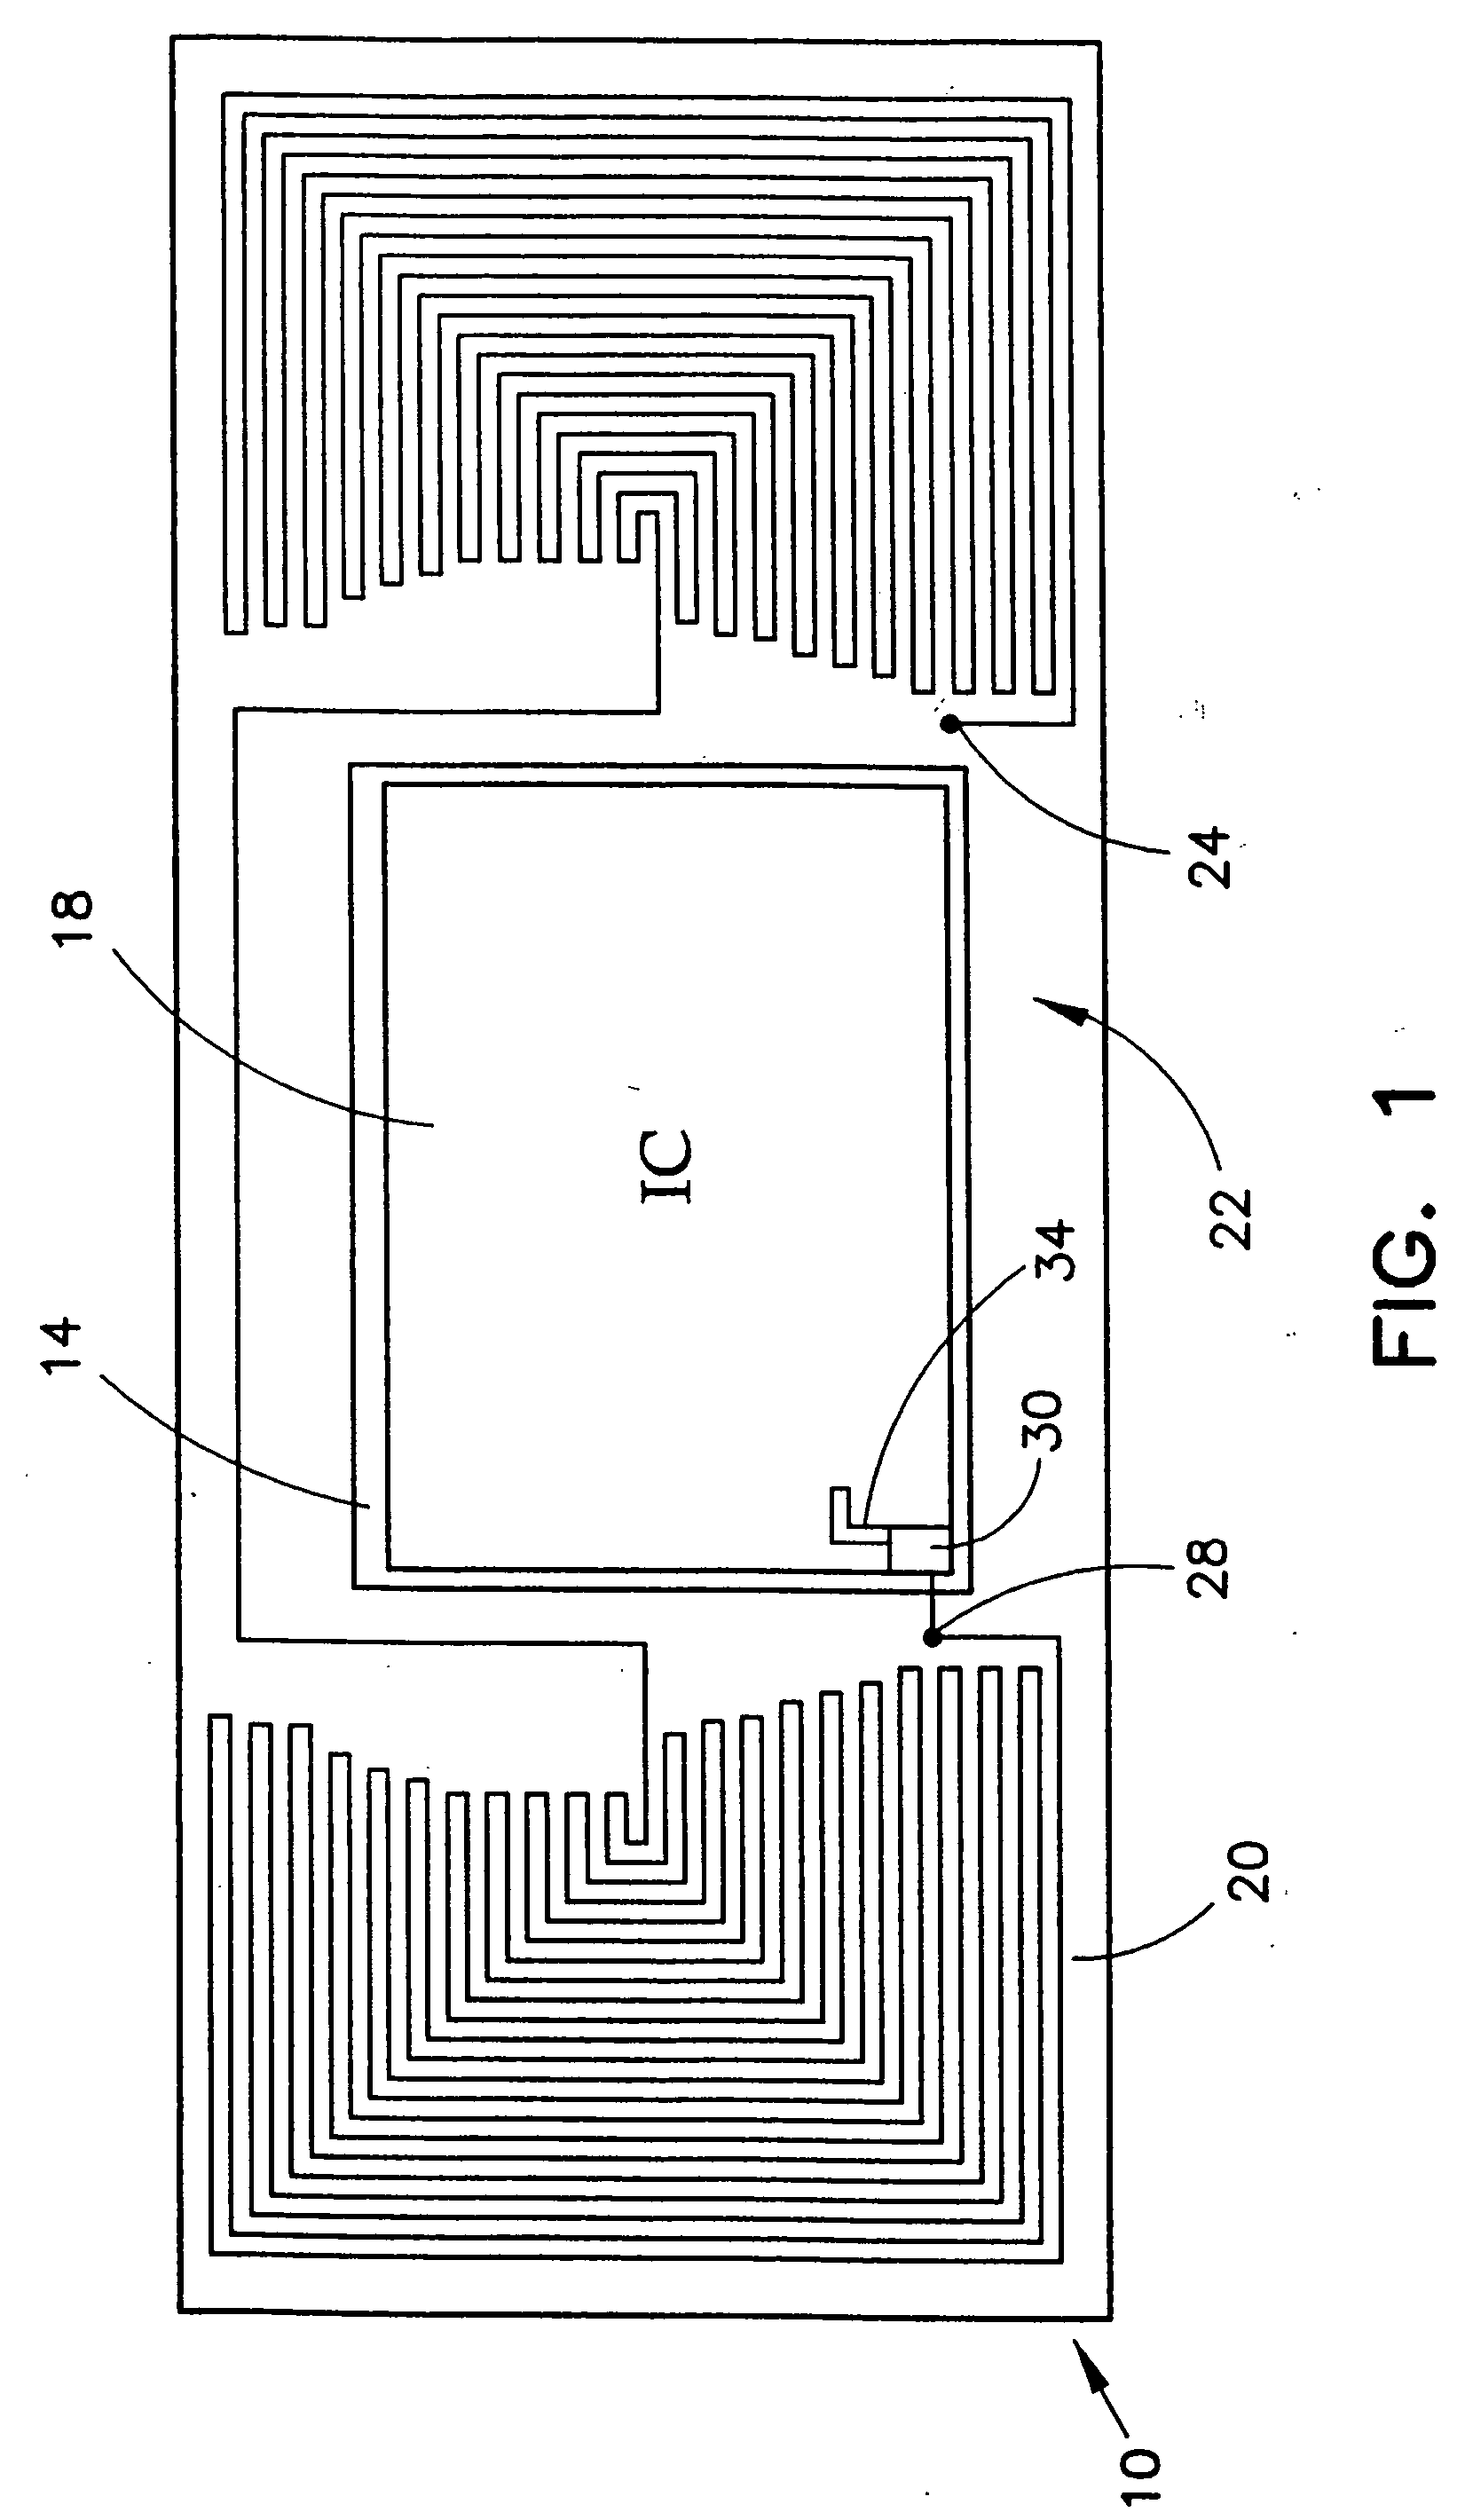 System and method for using film deposition techniques to provide an antenna within an integrated circuit package